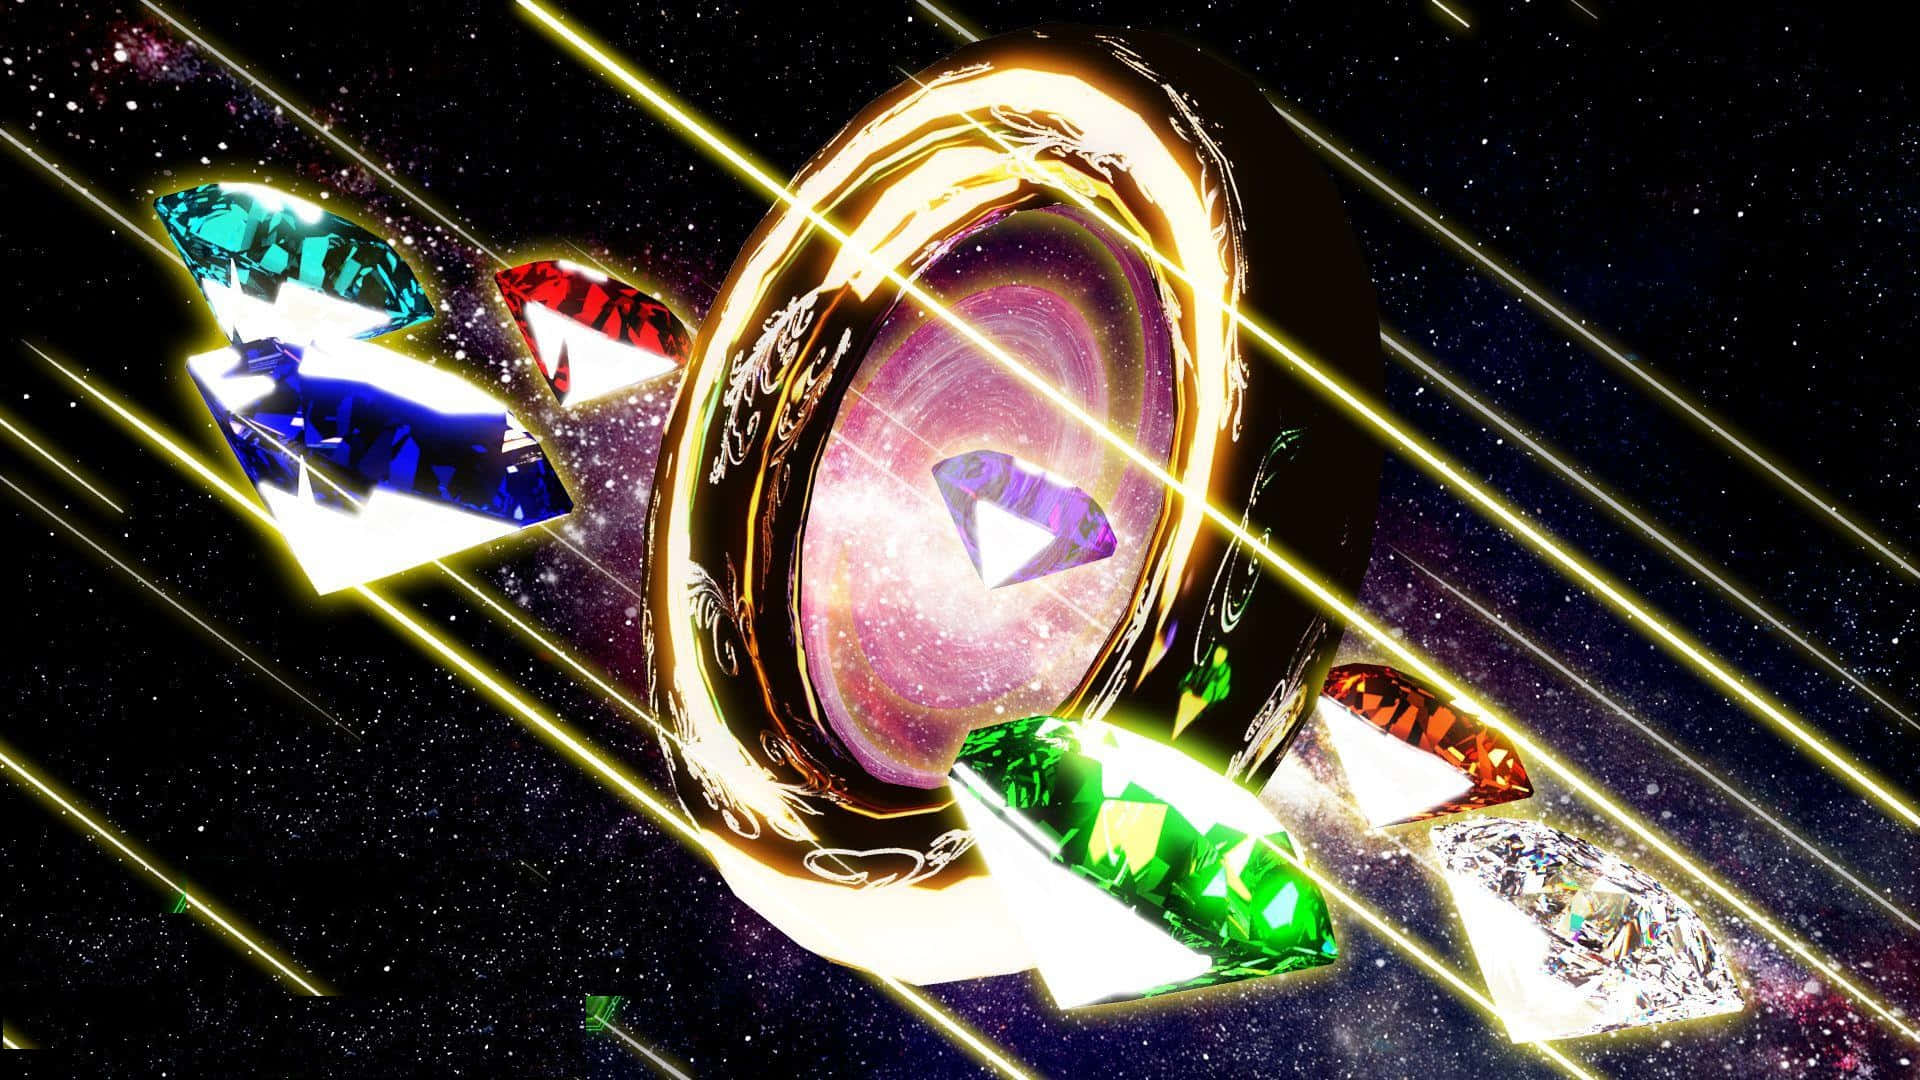 Caption: Masterful Display Of Chaos Emeralds Wallpaper